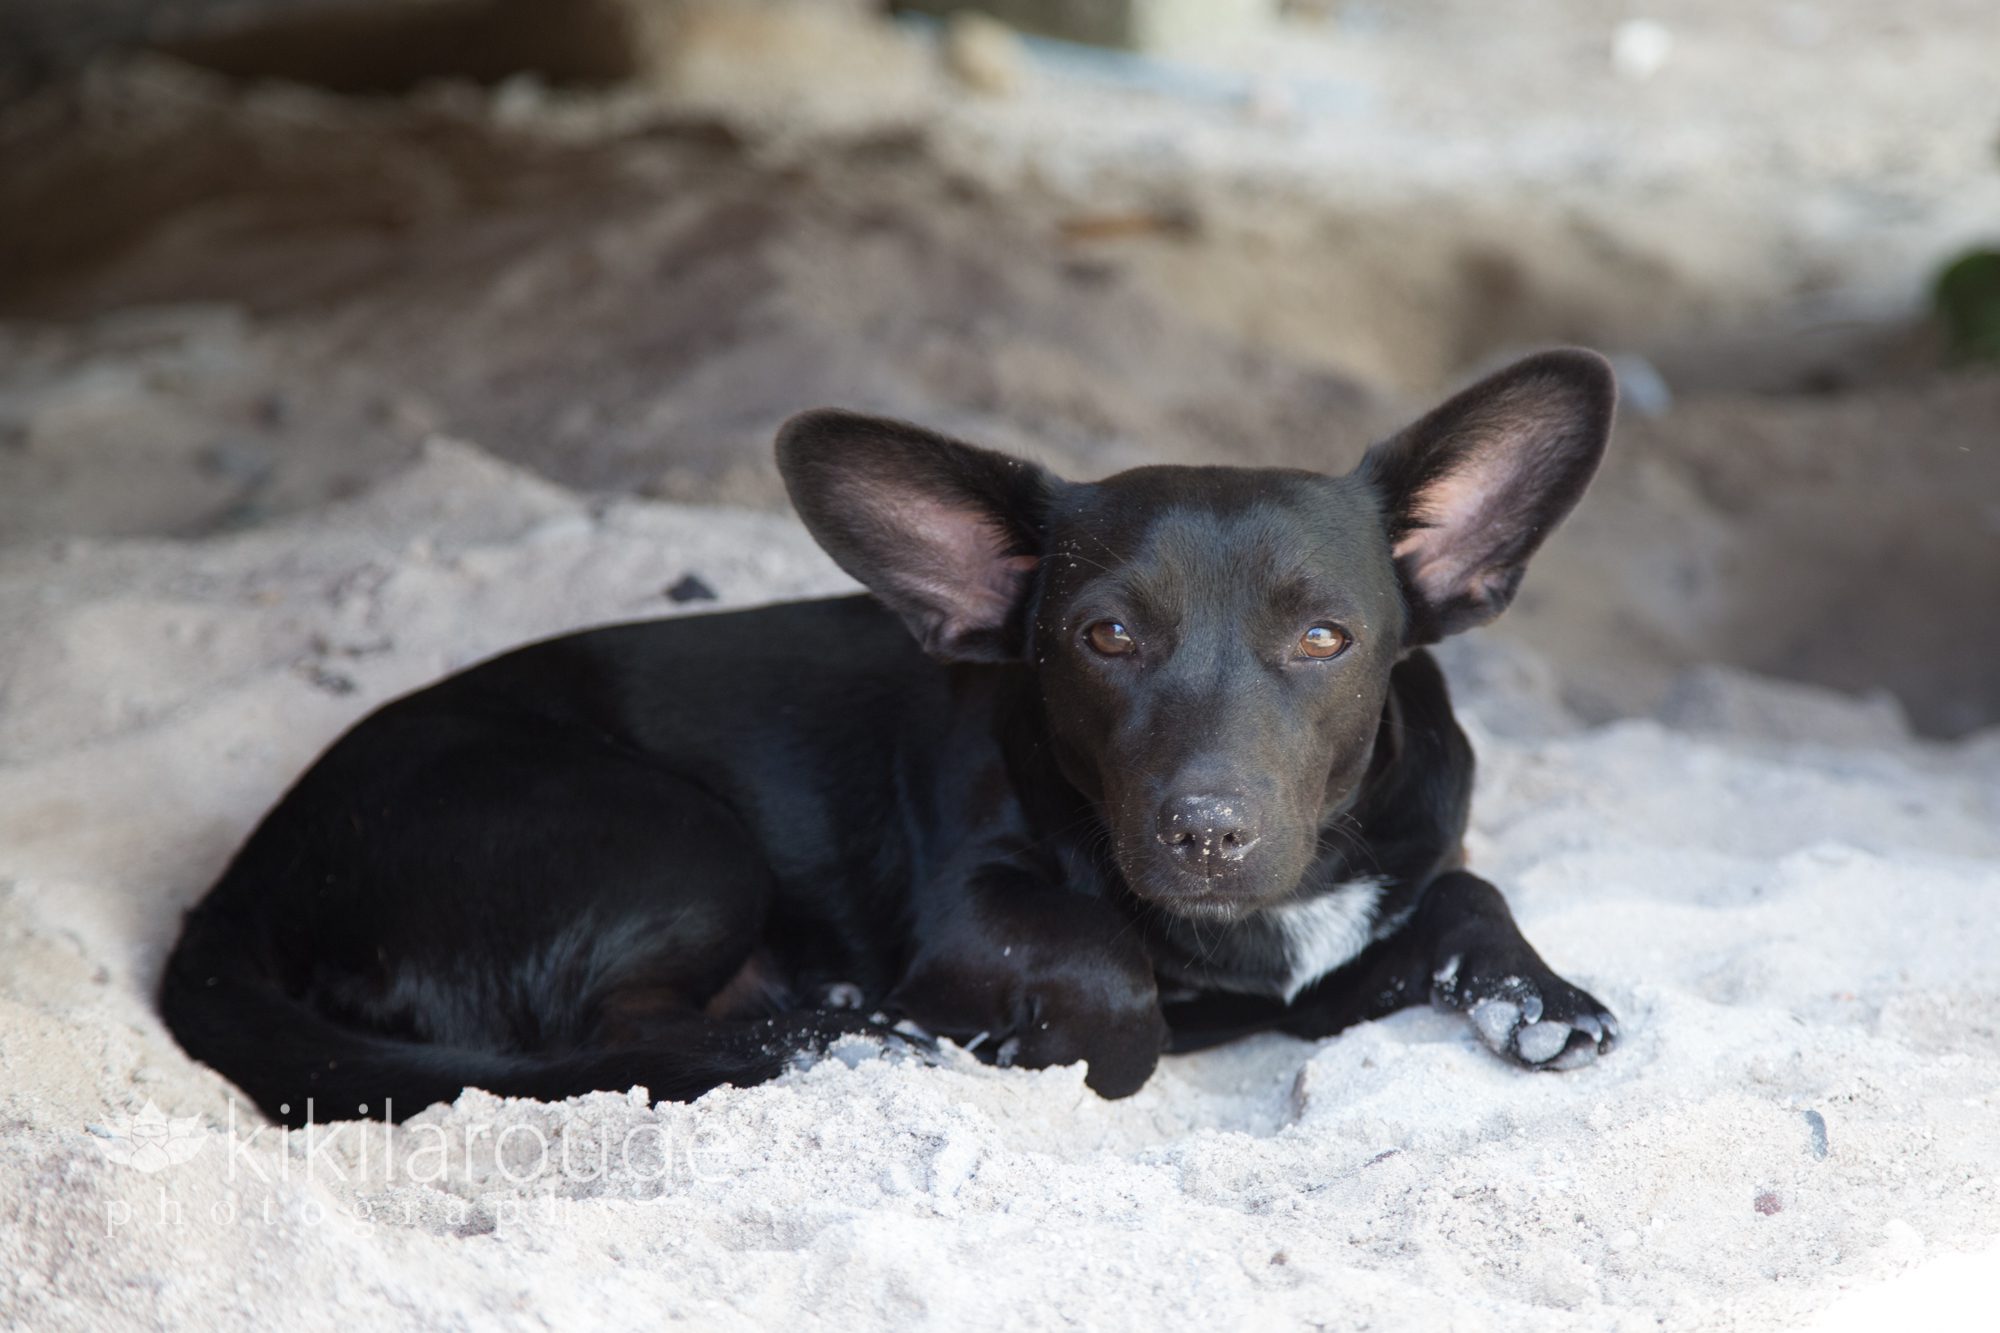 Little black rescue dog with big ears